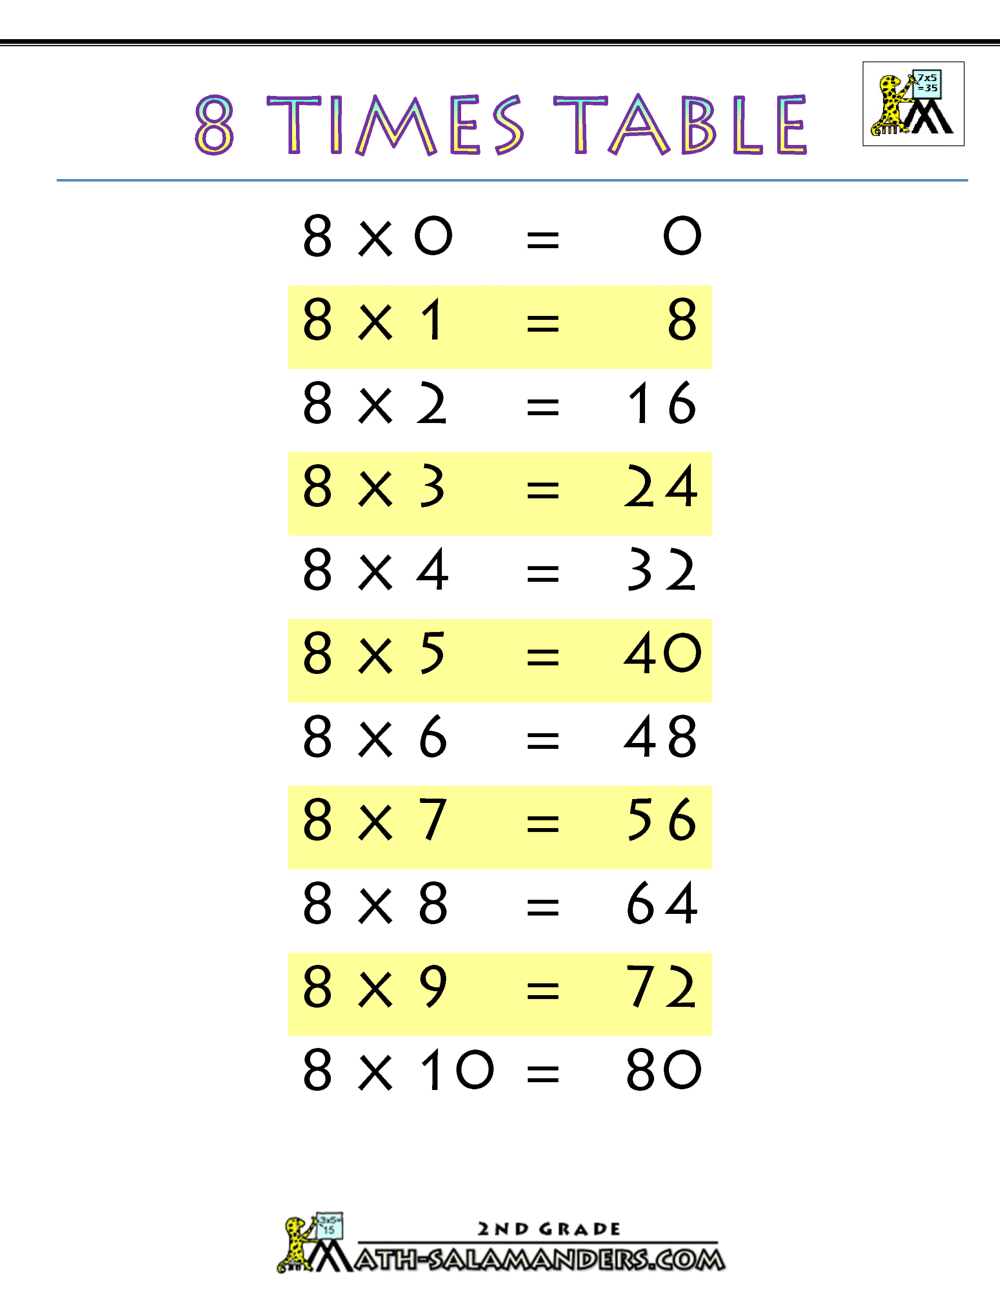 8 times tables multiplication sheet